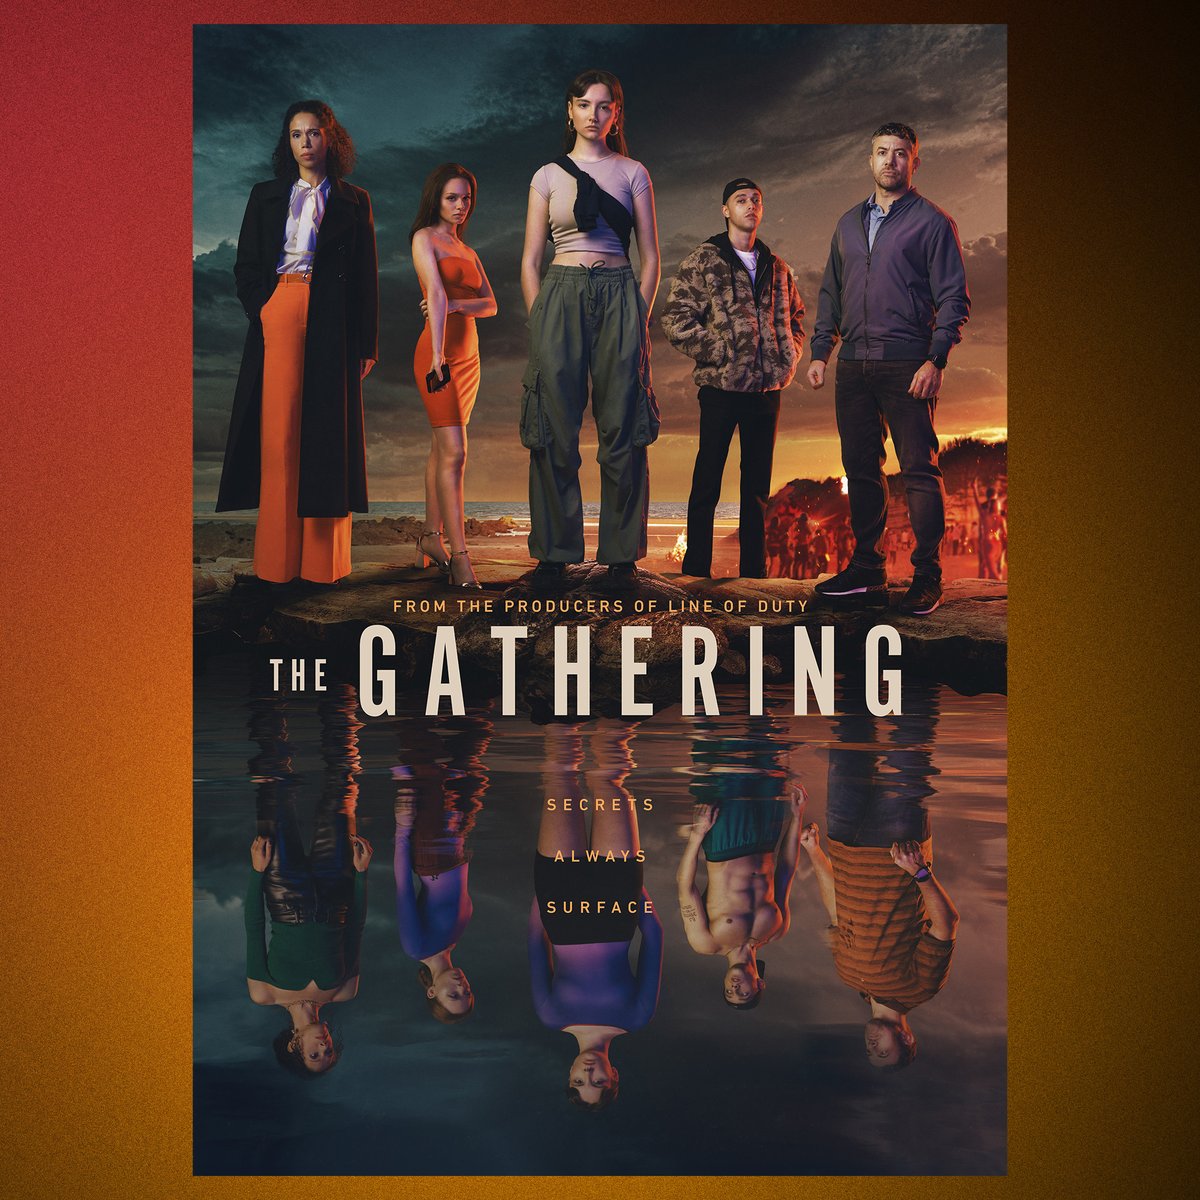 Secrets will be revealed 🤫

From the company behind Line Of Duty, ‘The Gathering’ is full of twists and turns.

The show is also among 9 fiction programmes nominated for a Golden Nymph Award 🎉

Catch it soon on @Channel4.

Produced by @worldprods, part of ITV Studios.